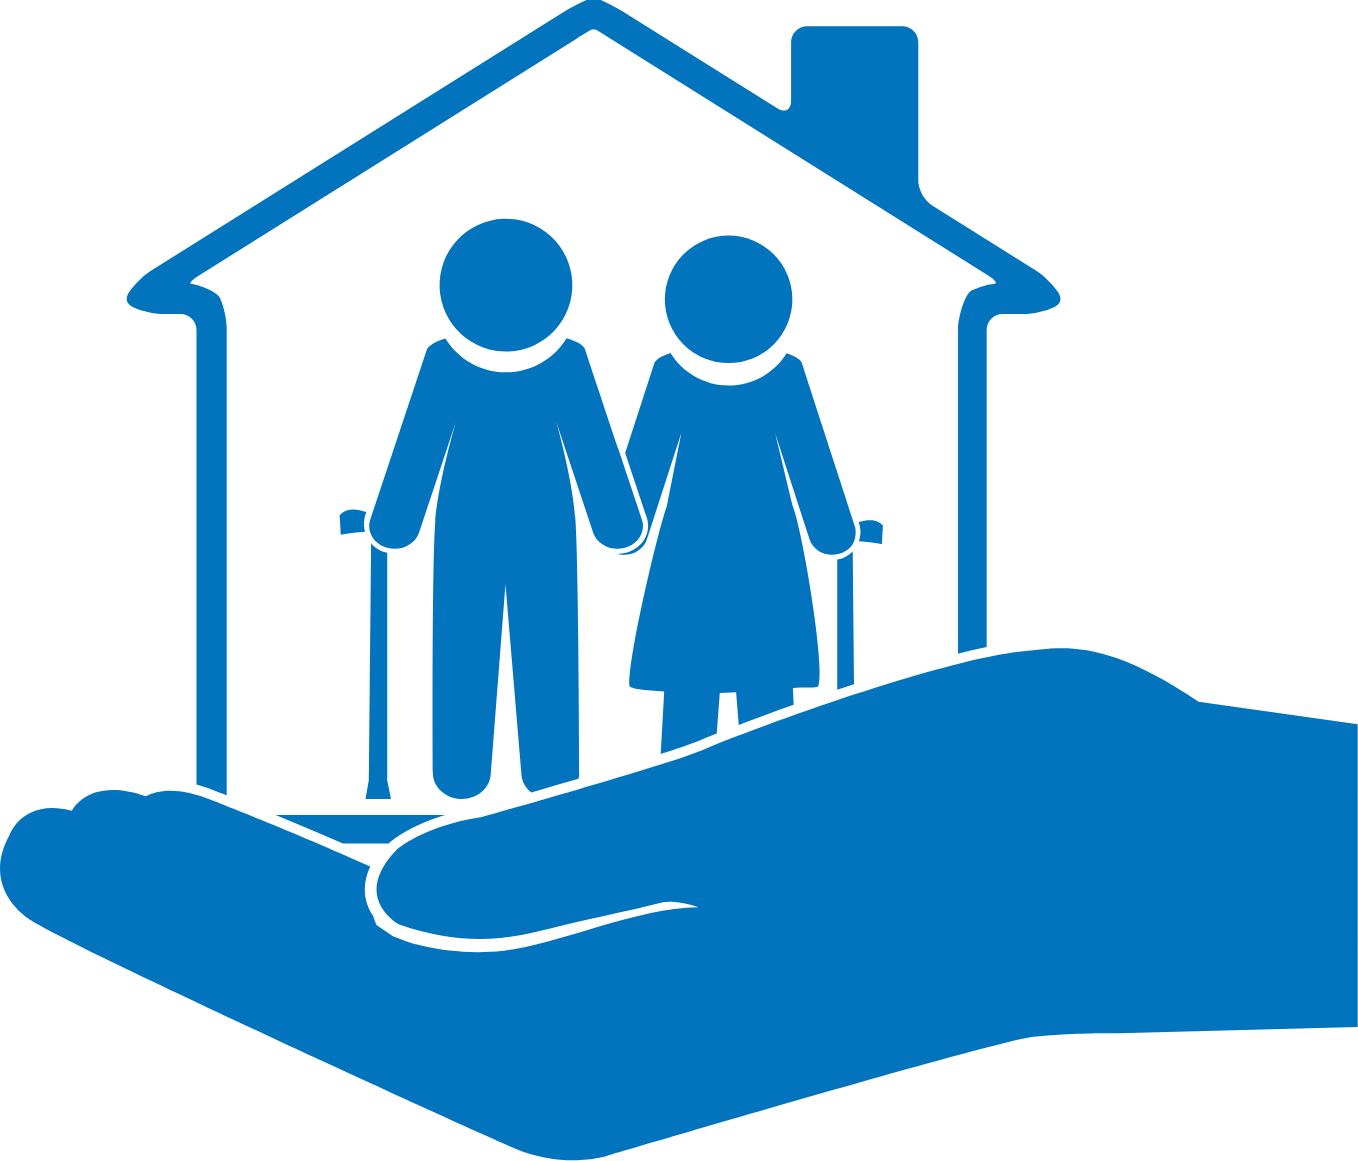 Icon of two elder people with a cane and a hand holding them representing assisted care living